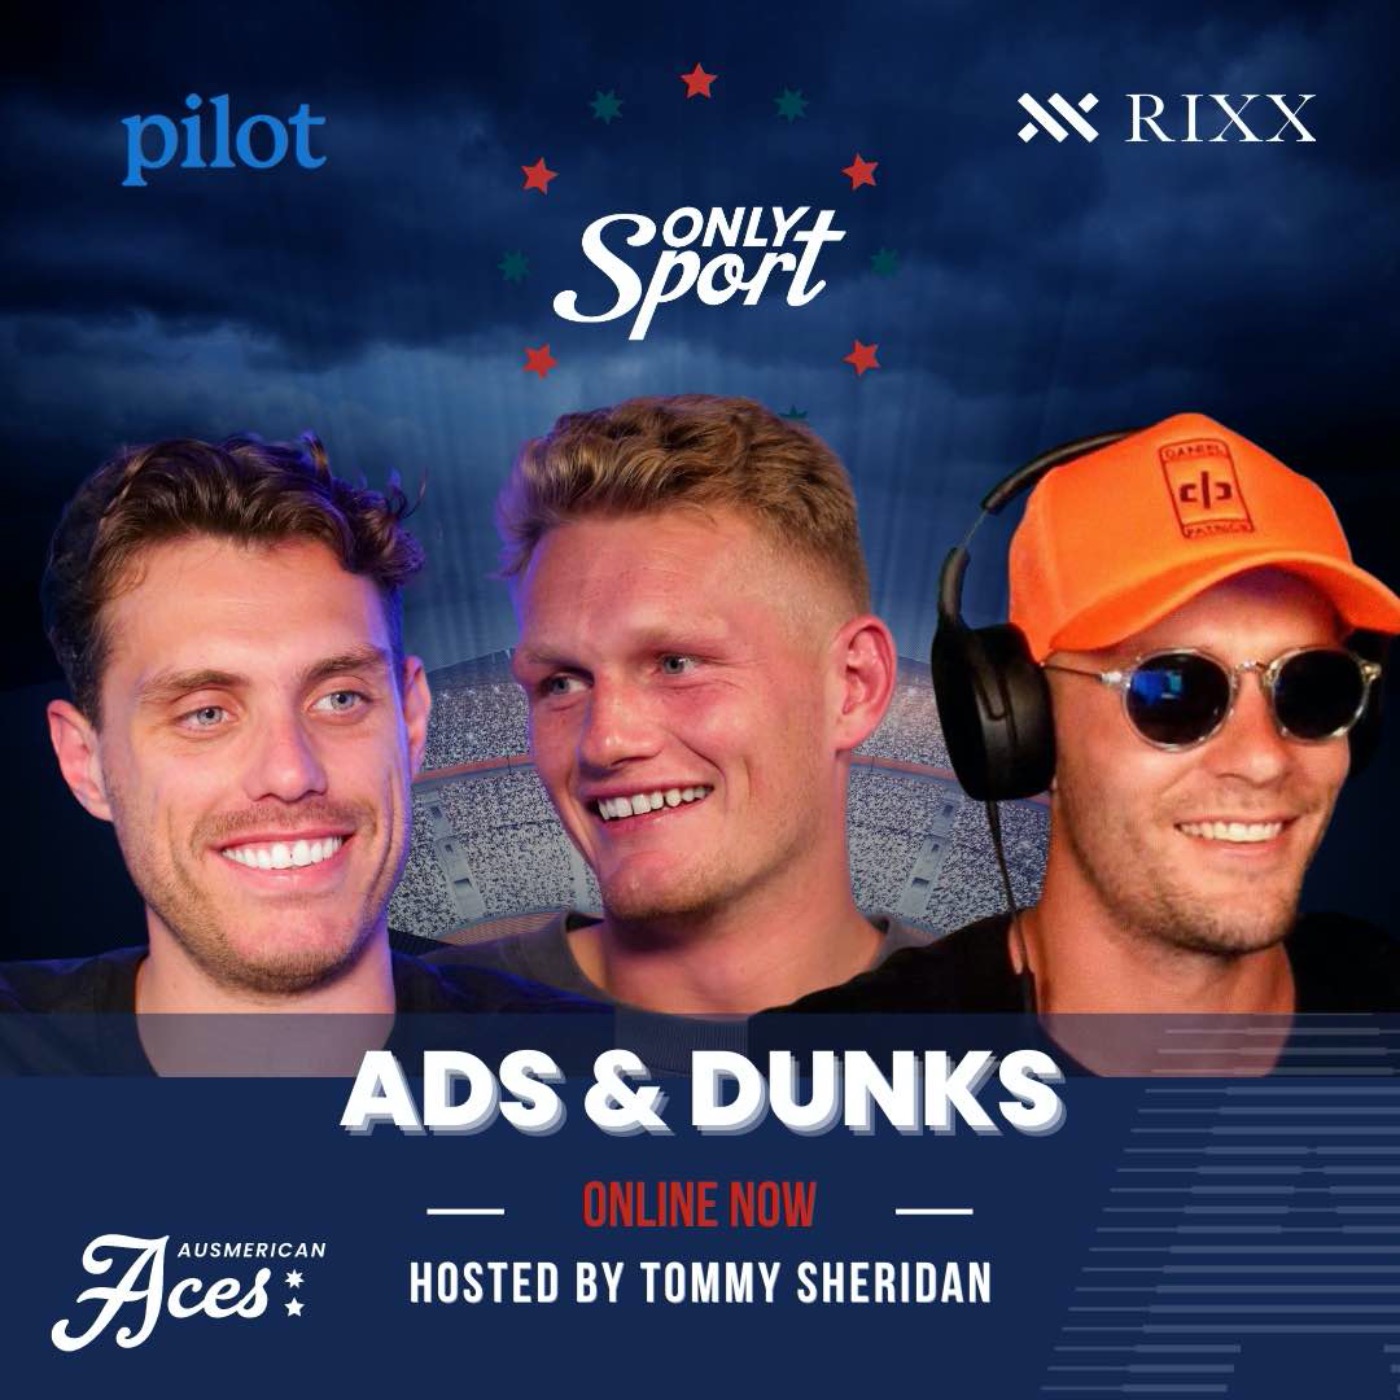 Only Sport with Ads & Dunks!